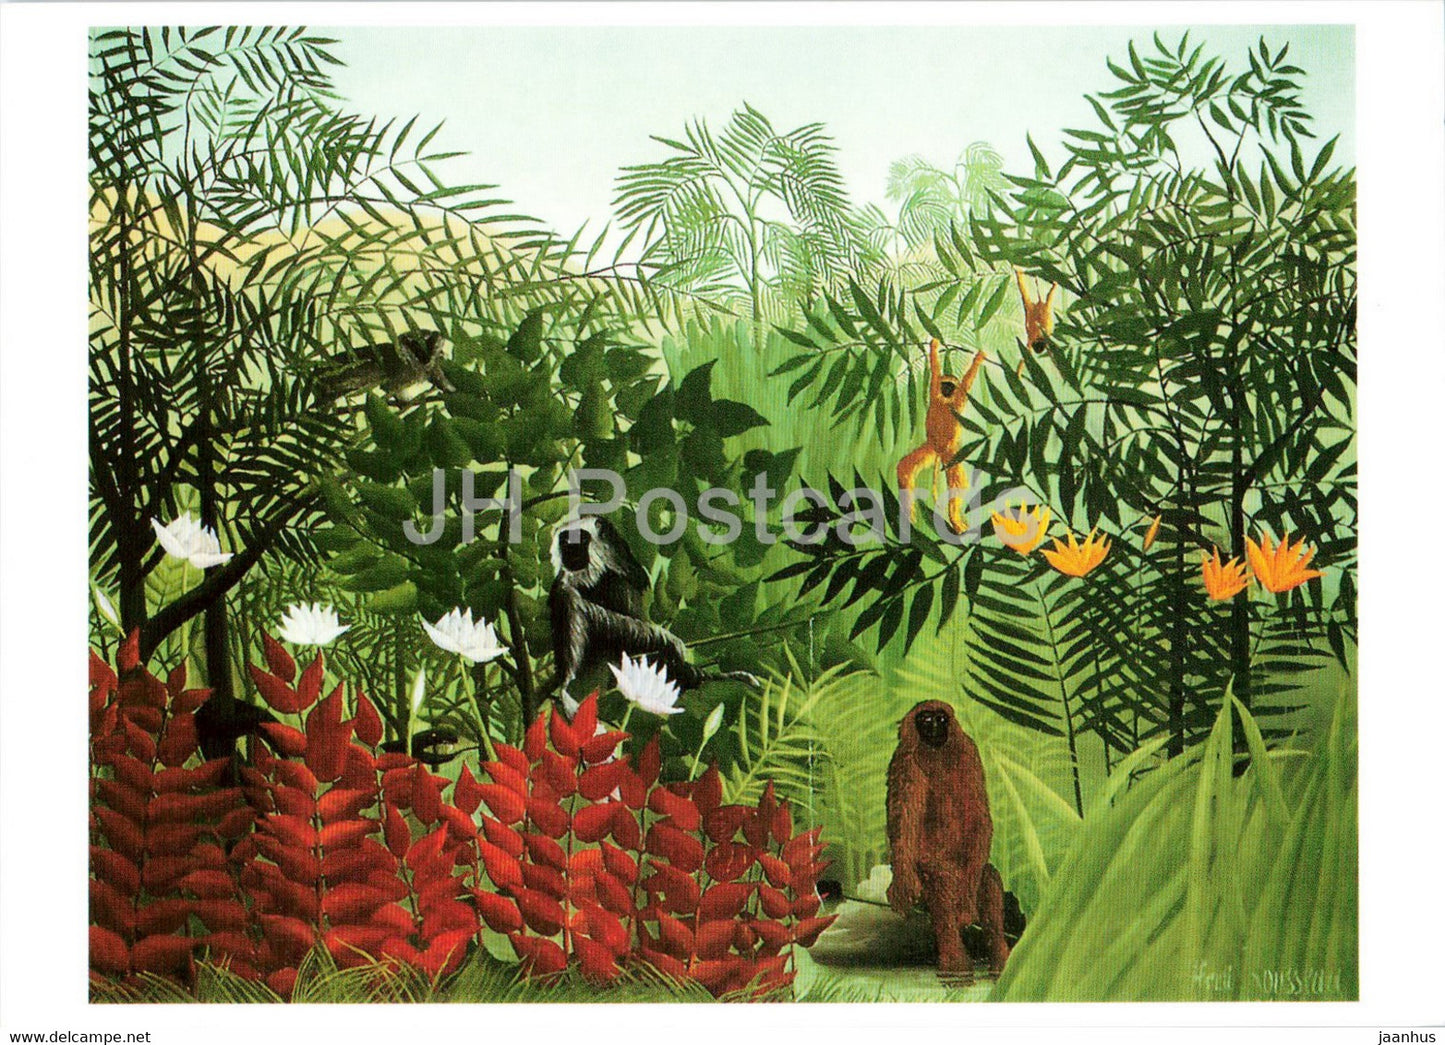 painting by Henri Rousseau - Tropischer Wald mit Affen - Tropical Forest with Monkeys  French art - Switzerland - unused - JH Postcards